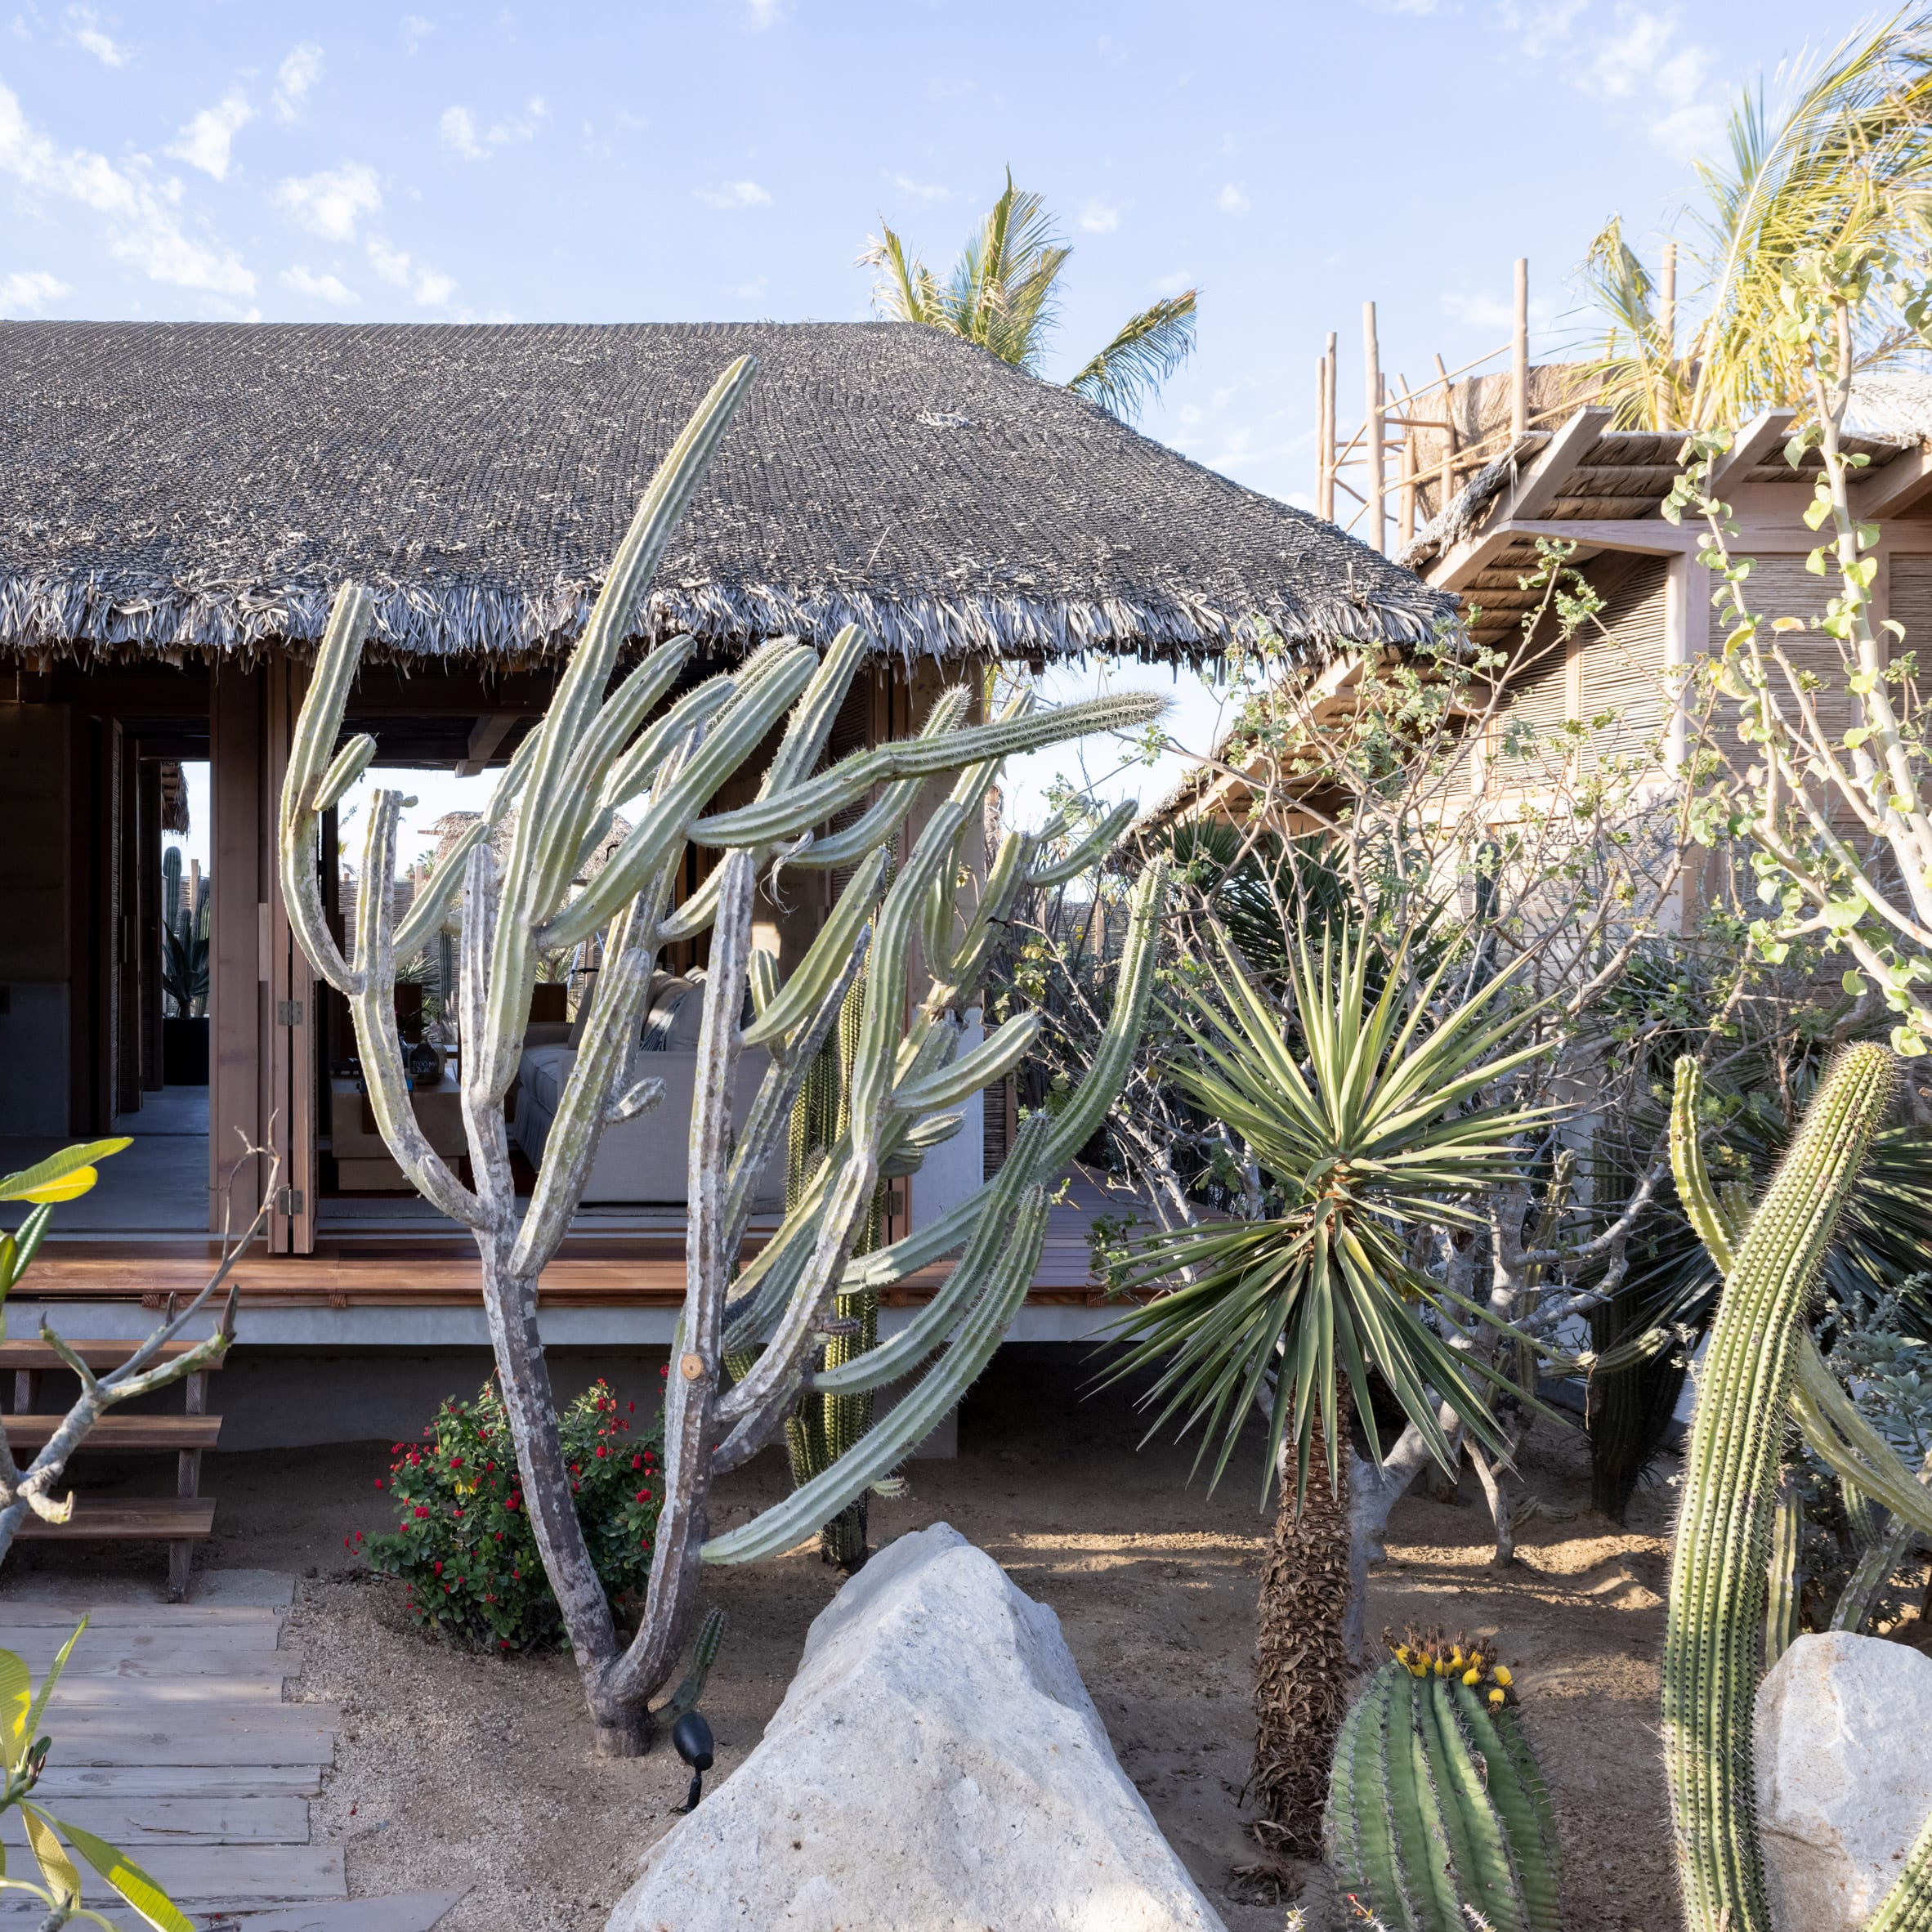 Hotel in Mexico with cactuses and thatched roof